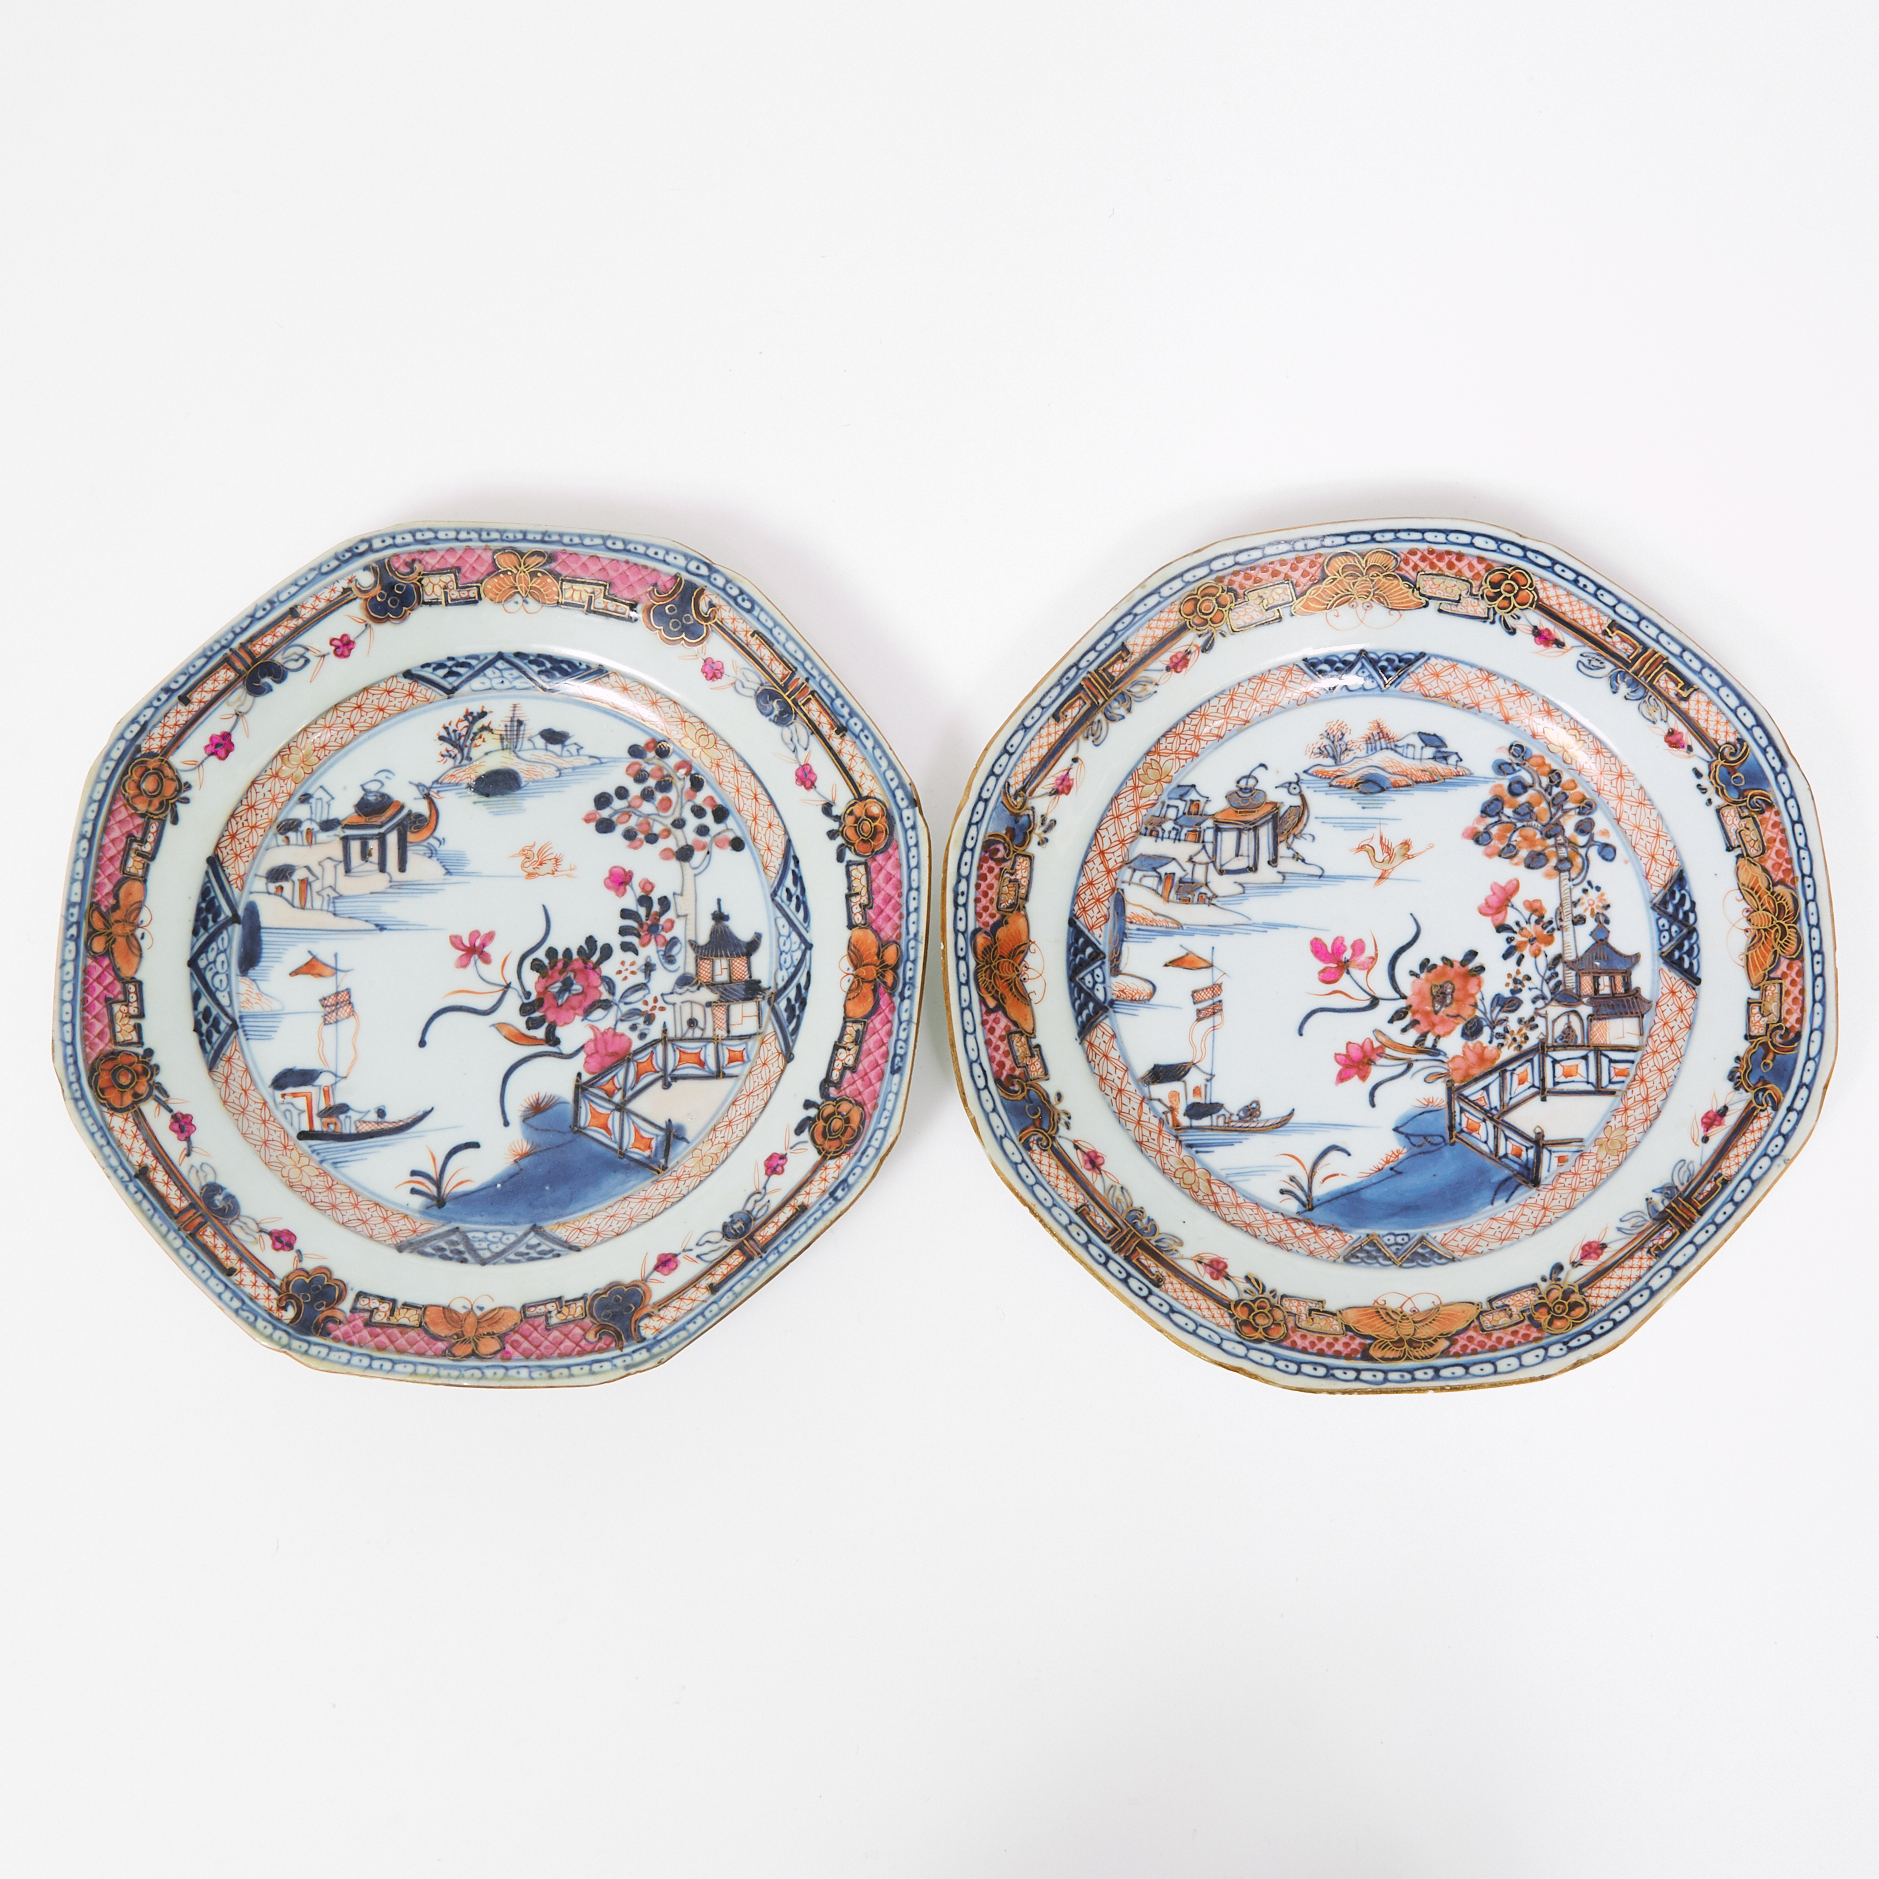 An Extremely Rare Pair of Octagonal Blue and White Pink-Enameled and Gilt 'Landscape' Plates, Yongzheng/Qianlong Period, 18th Century